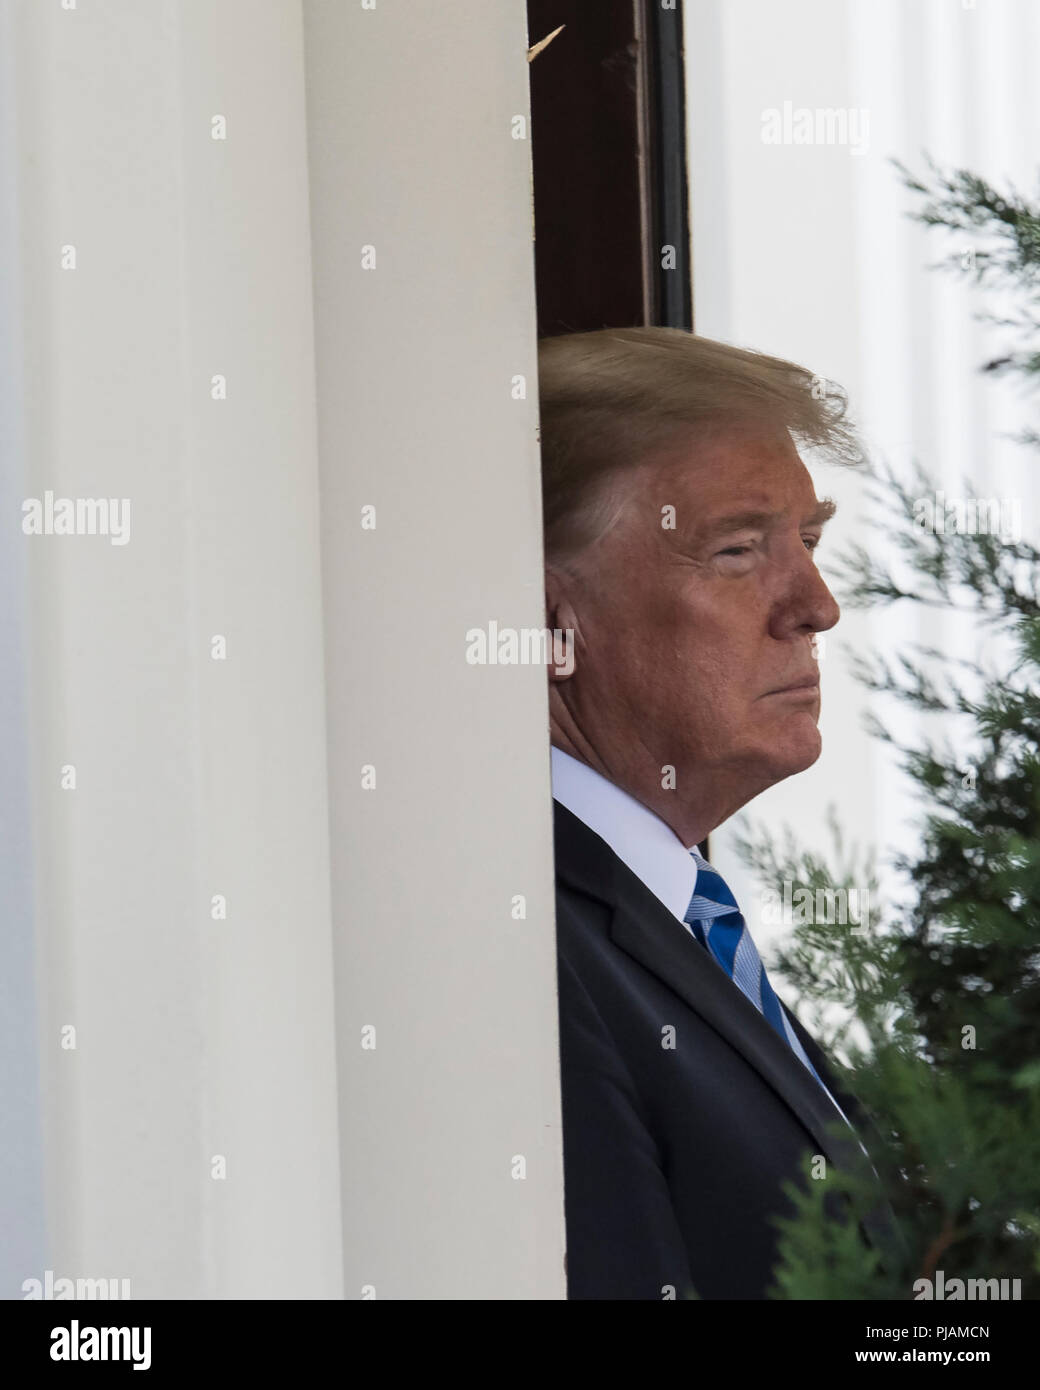 Washington DC, September 5, 2018, USA: President Donald J Trump awaits the arrival of the Emir of Kuwait at the front door of the White House.  Patsy Lynch/Alamy Credit: Patsy Lynch/Alamy Live News Stock Photo